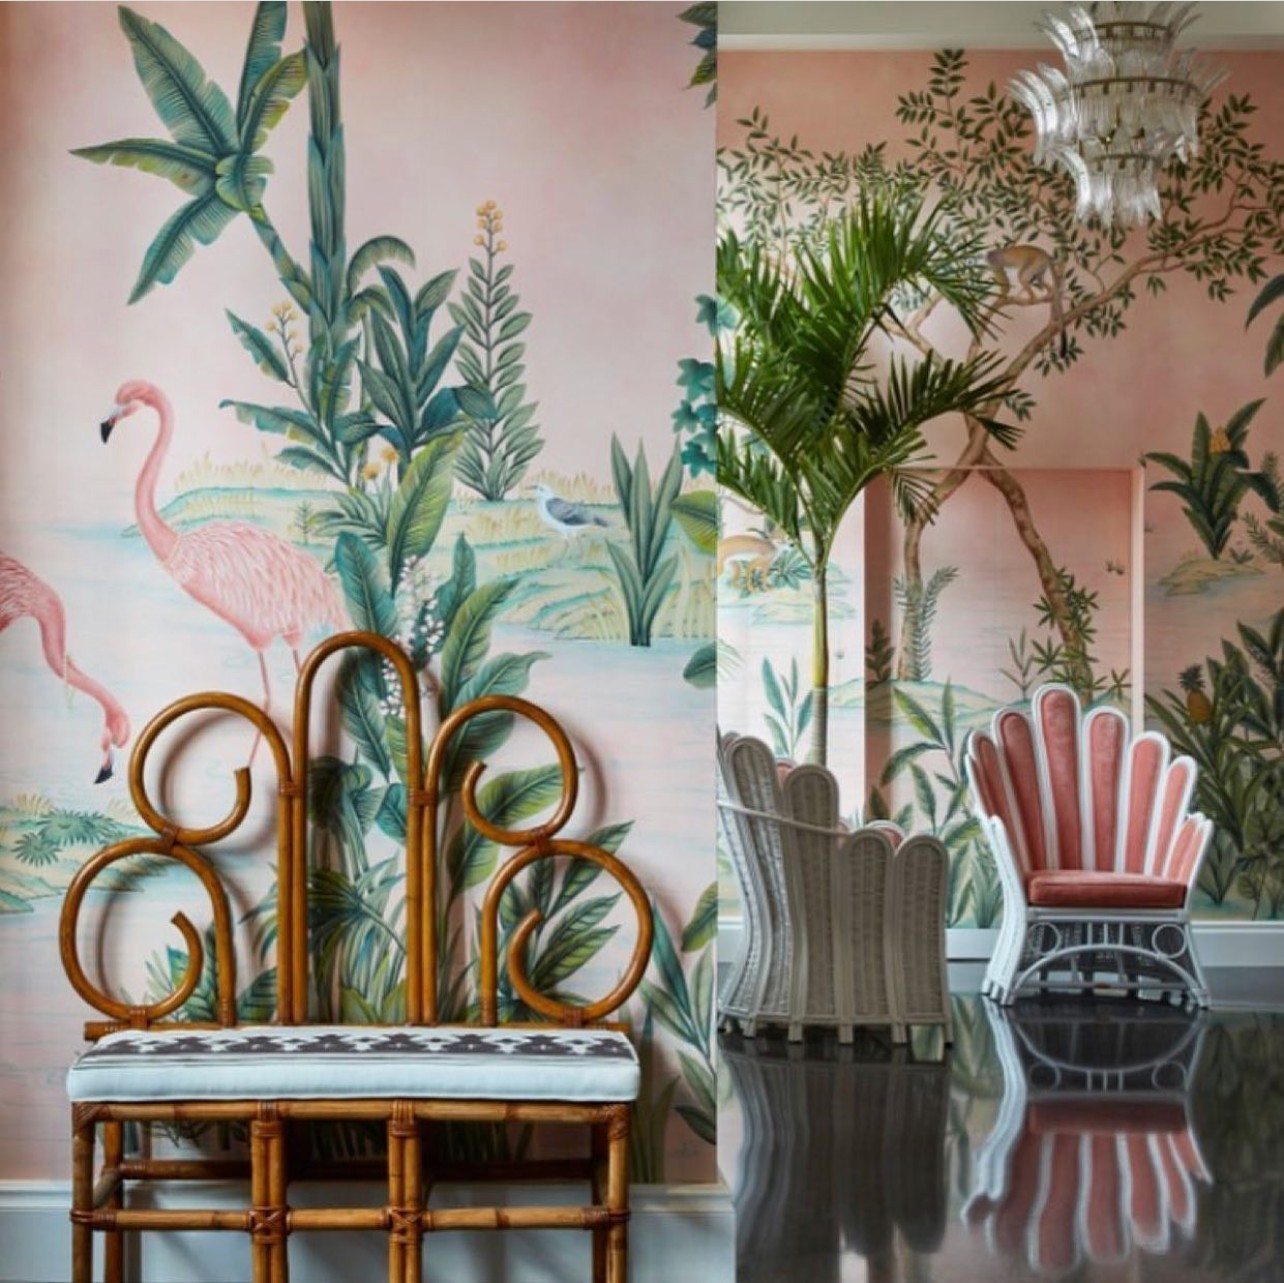 In Design | Décor Inspiration: de Gournay at the Colony Hotel, Palm Beach